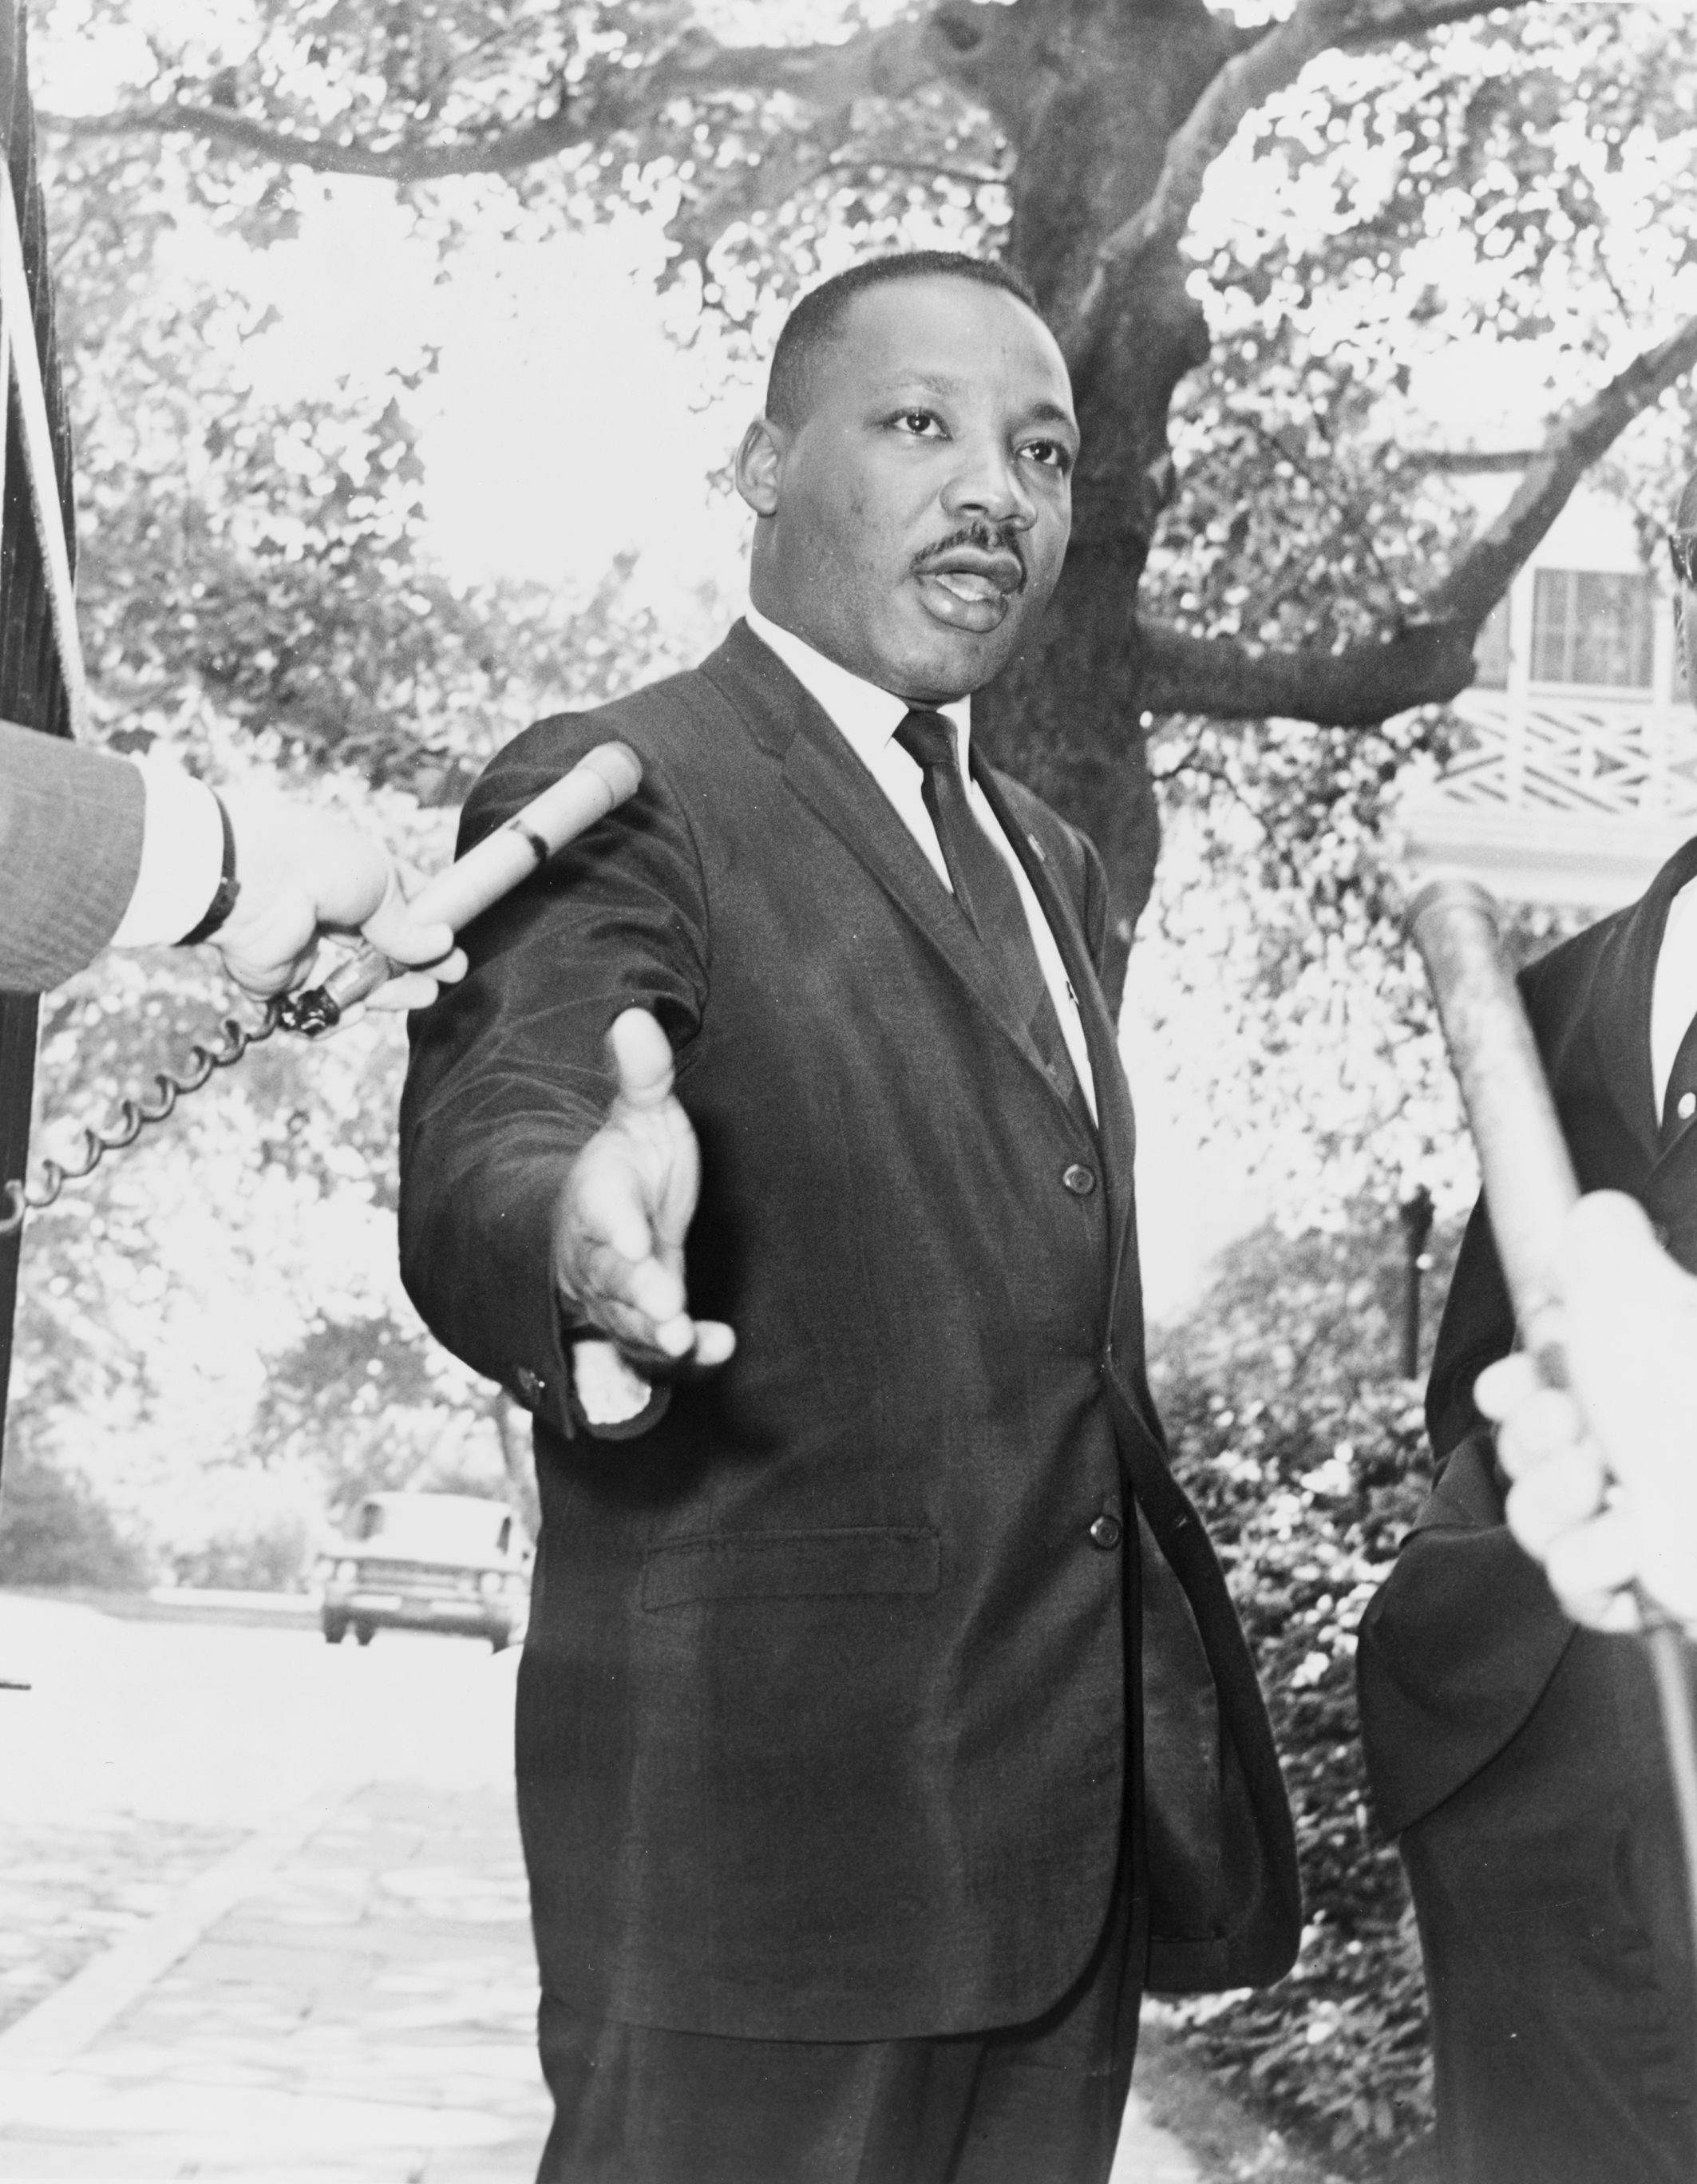 Martin luther king photo